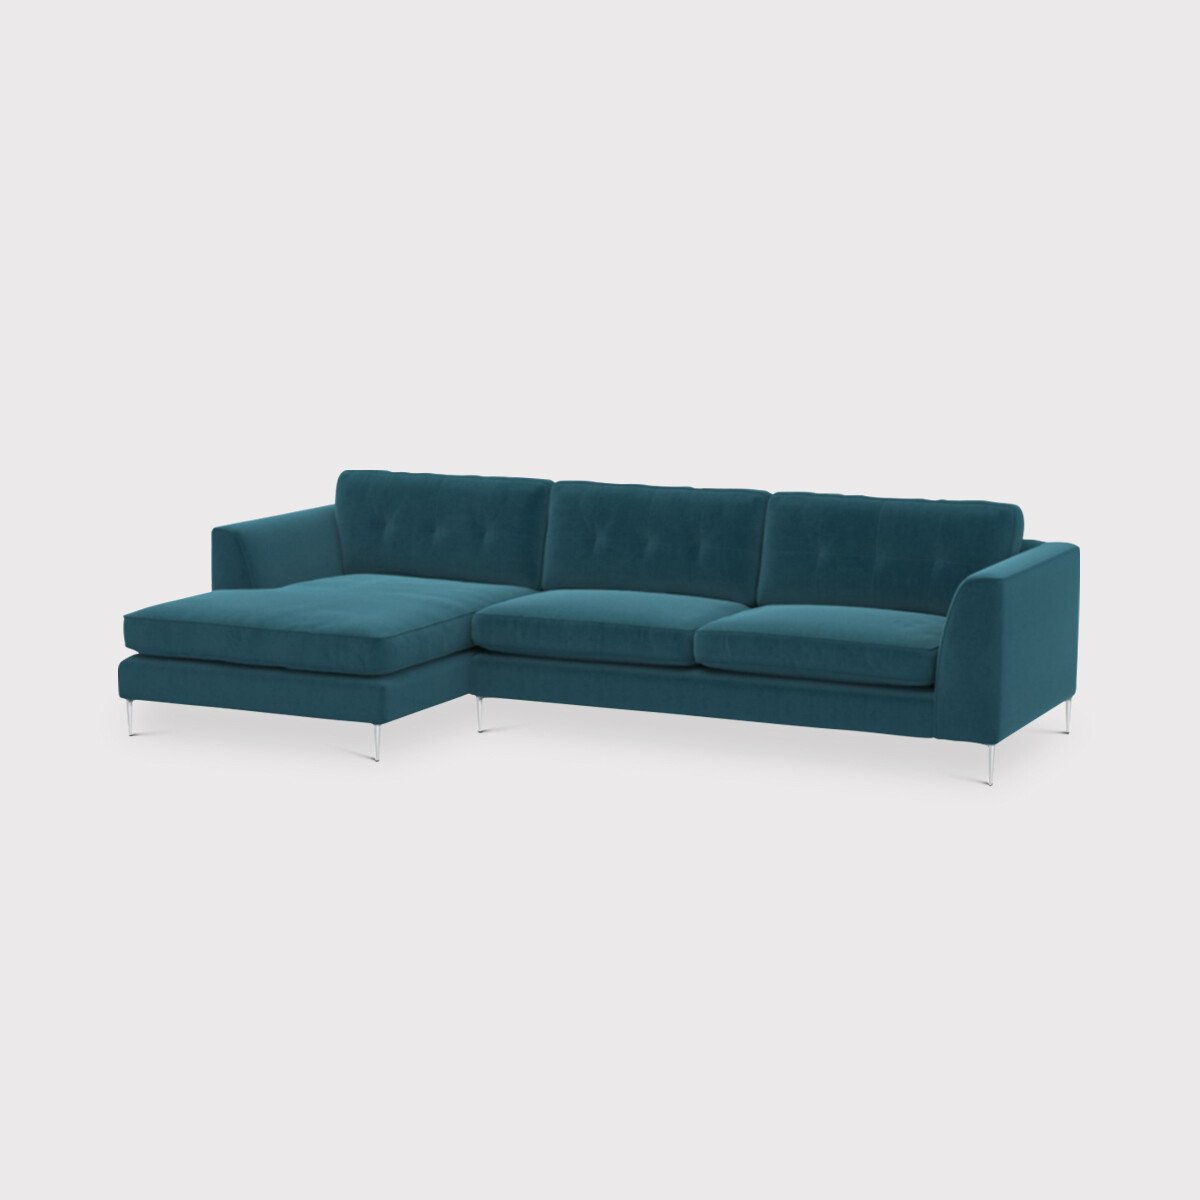 Conza Large Chaise Corner Sofa Left, Teal Fabric | Barker & Stonehouse